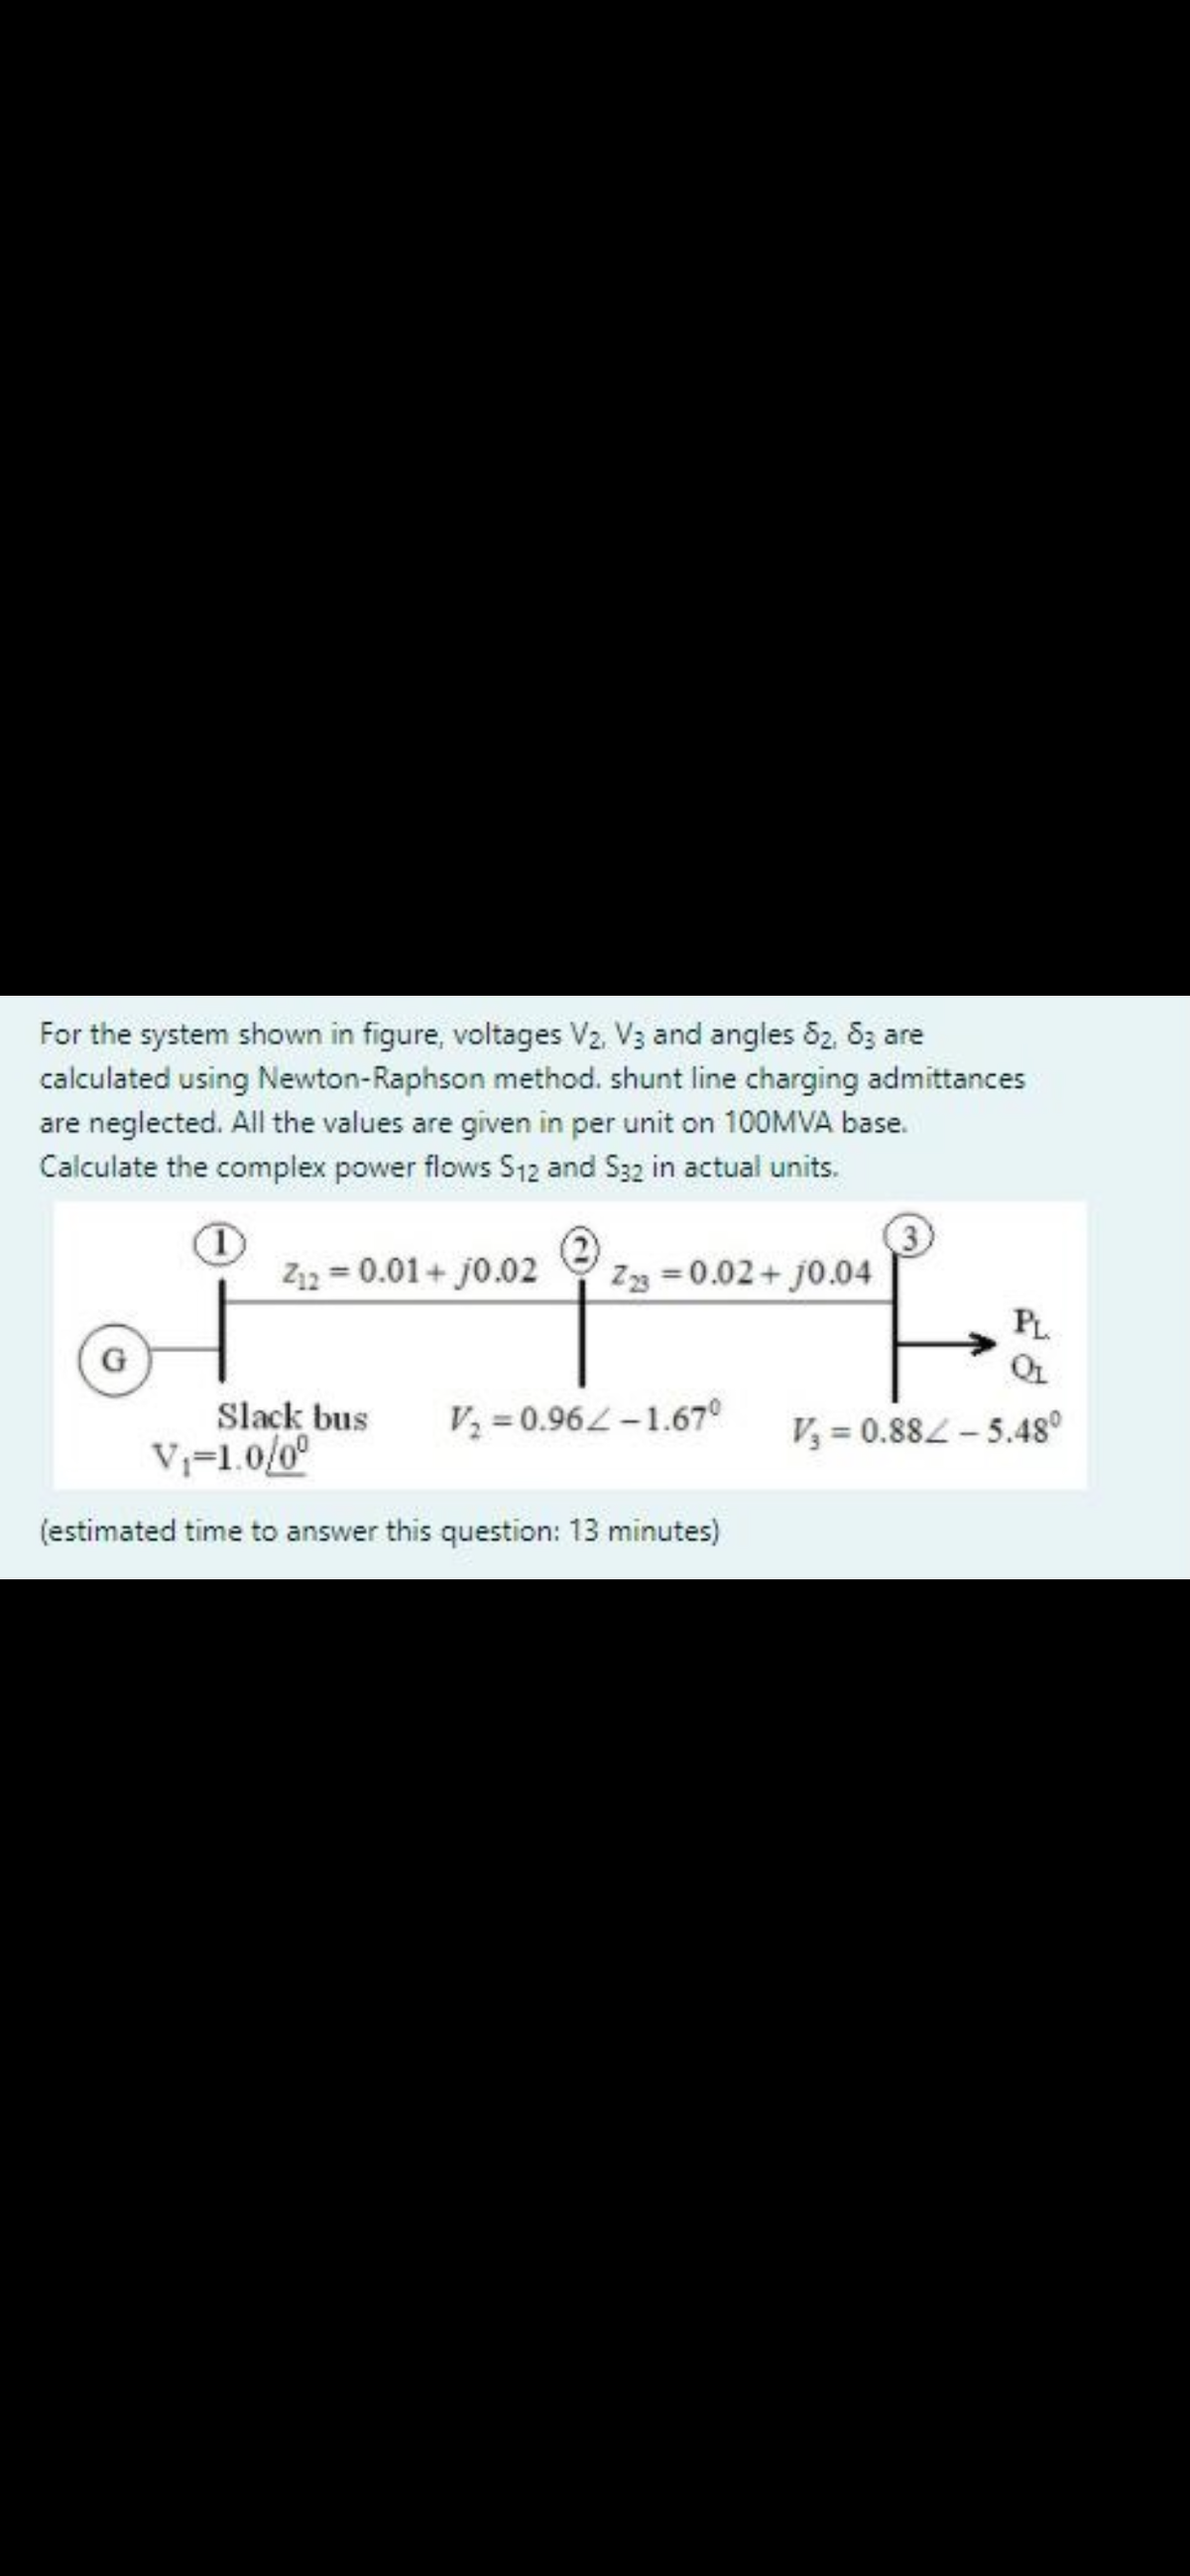 For the system shown in figure, voltages V2. V3 and angles 82, 8z are
calculated using Newton-Raphson method. shunt line charging admittances
are neglected. All the values are given in per unit on 100MVA base.
Calculate the complex power flows S12 and S32 in actual units.
Z12 = 0.01+ j0.02
Z3 = 0.02 + j0.04
PL
Slack bus
V=1.0/0°
V = 0.96L-1.67°
V, = 0.882-5.48°
(estimated time to answer this question: 13 minutes)
